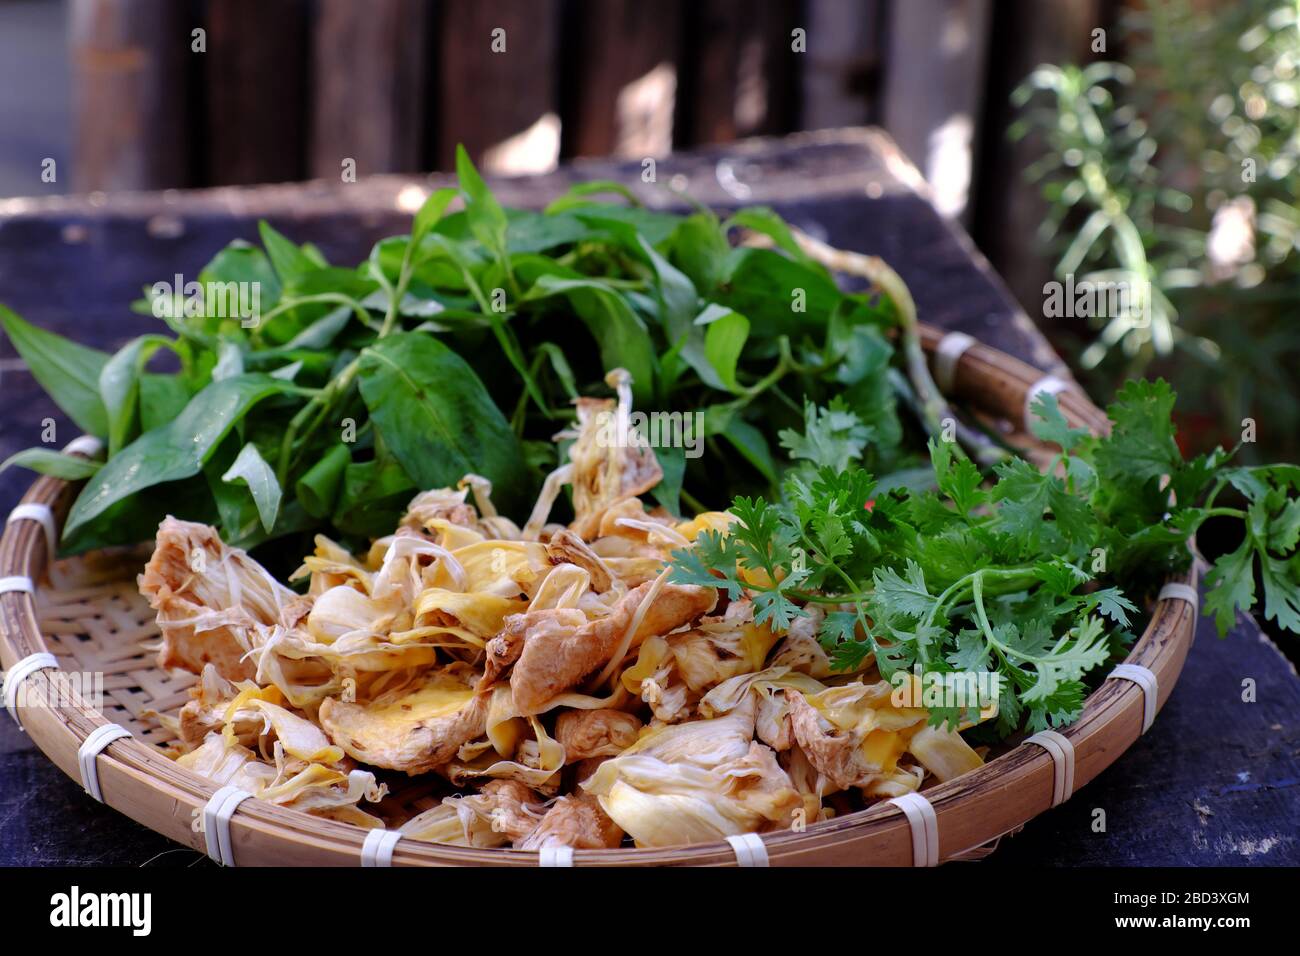 High view tray raw material of homemade Vietnamese vegan food for daily meal, edible fibre of breadfruit cook dried with sauce and laksa leaves, delic Stock Photo